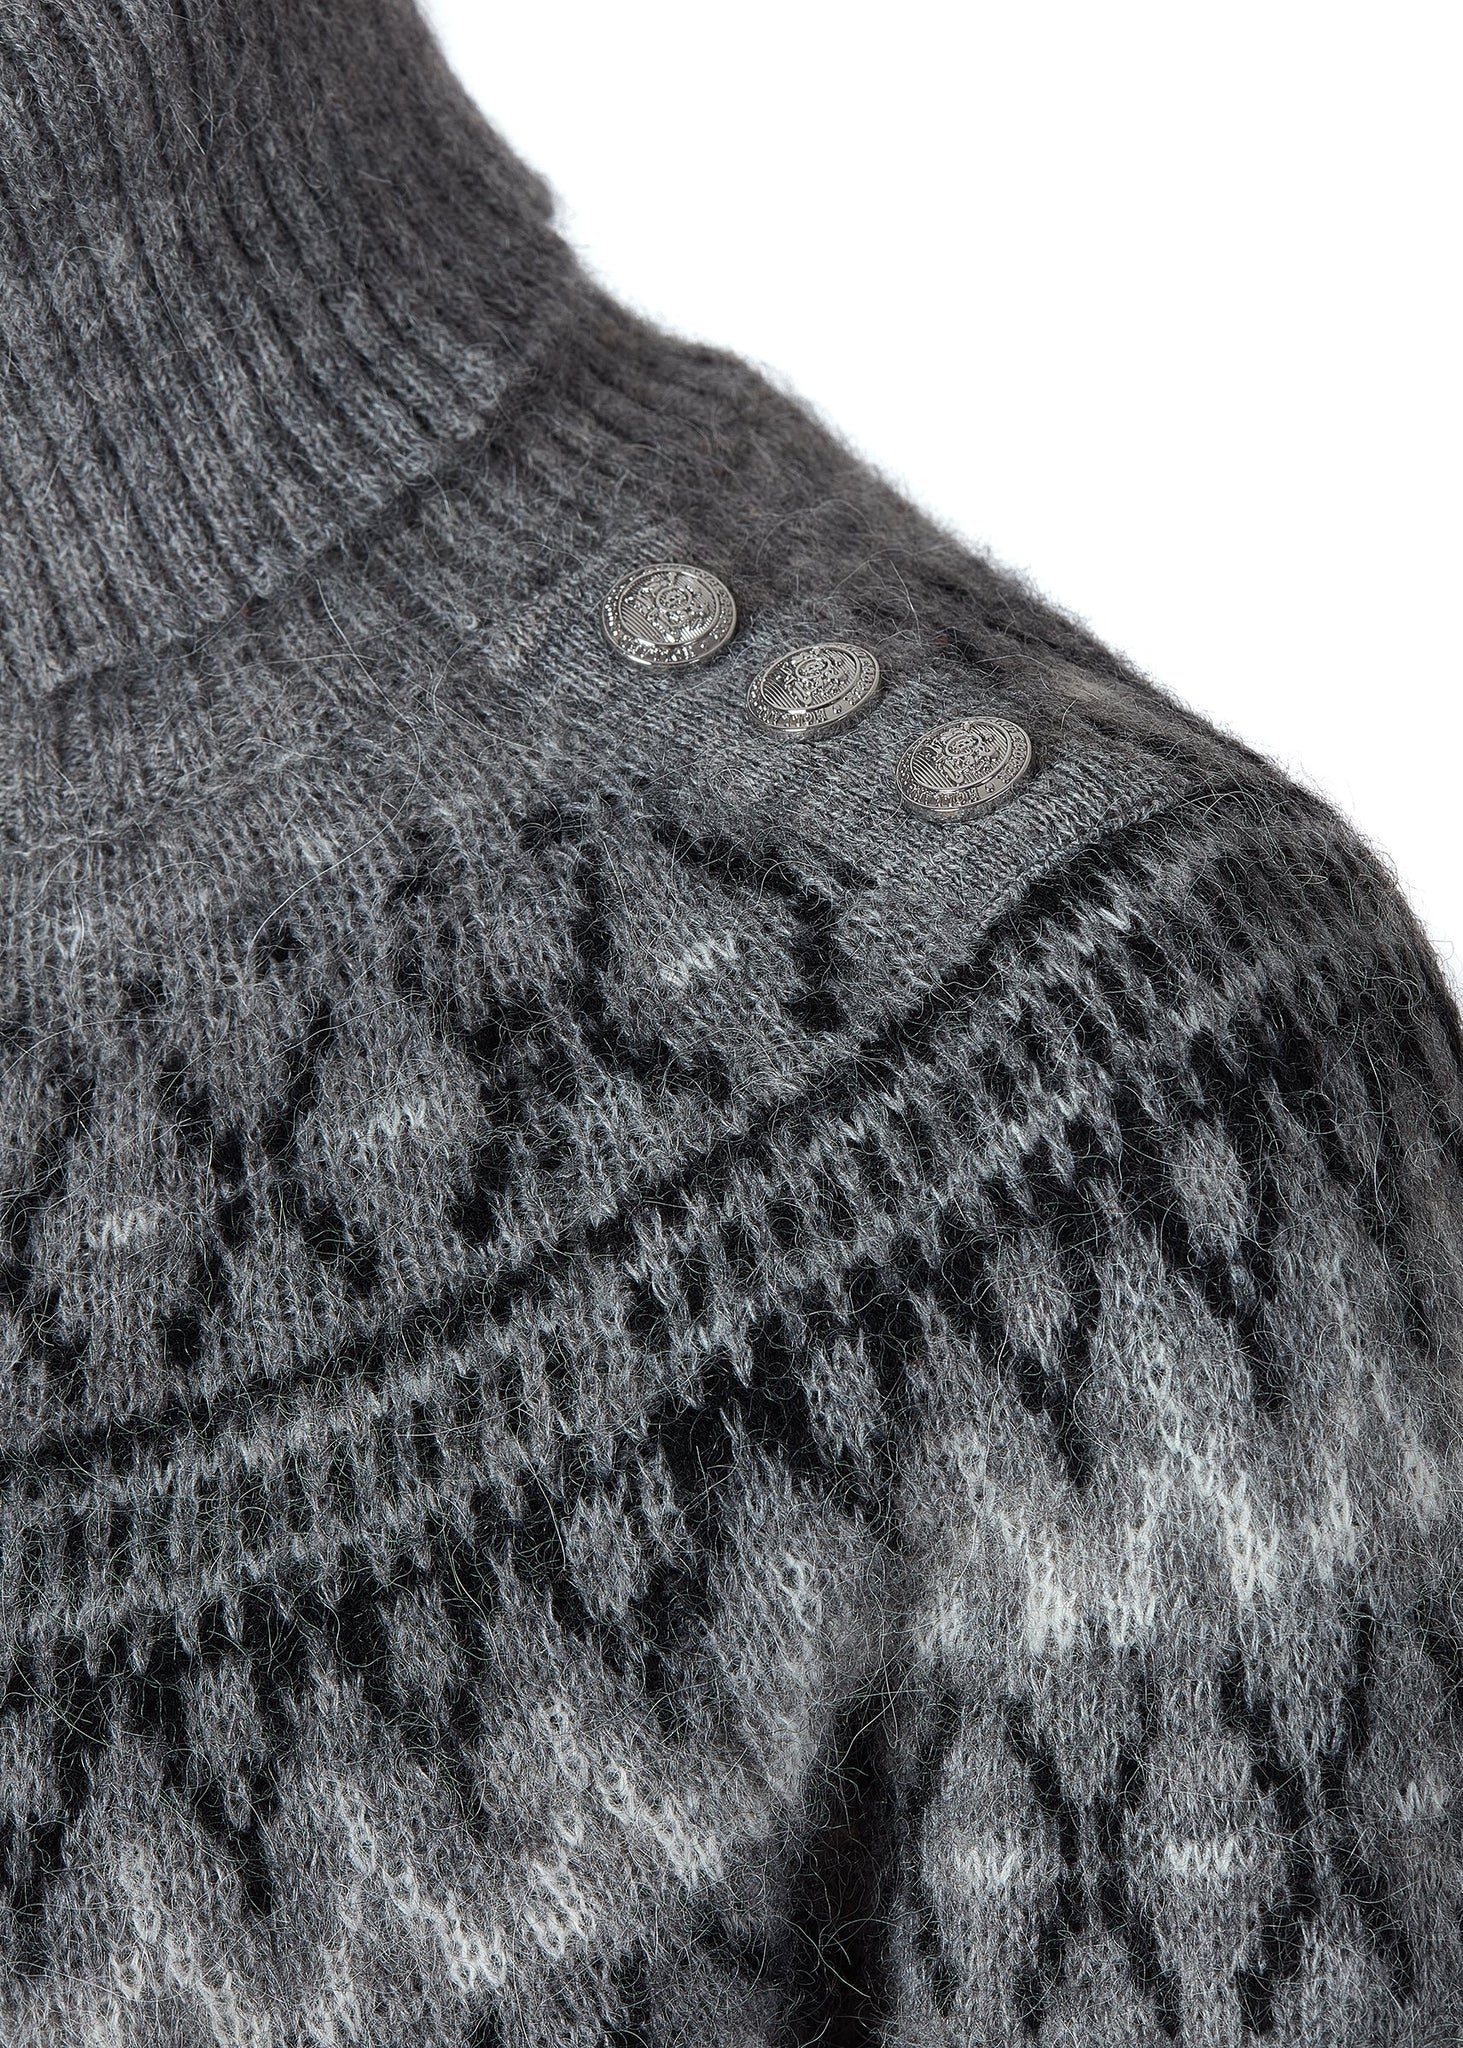 silver button detail on shoulders of womens classic grey roll neck jumper with fairisle knit in black and white around the shoulders waistline and cuffs and a split ribbed hem